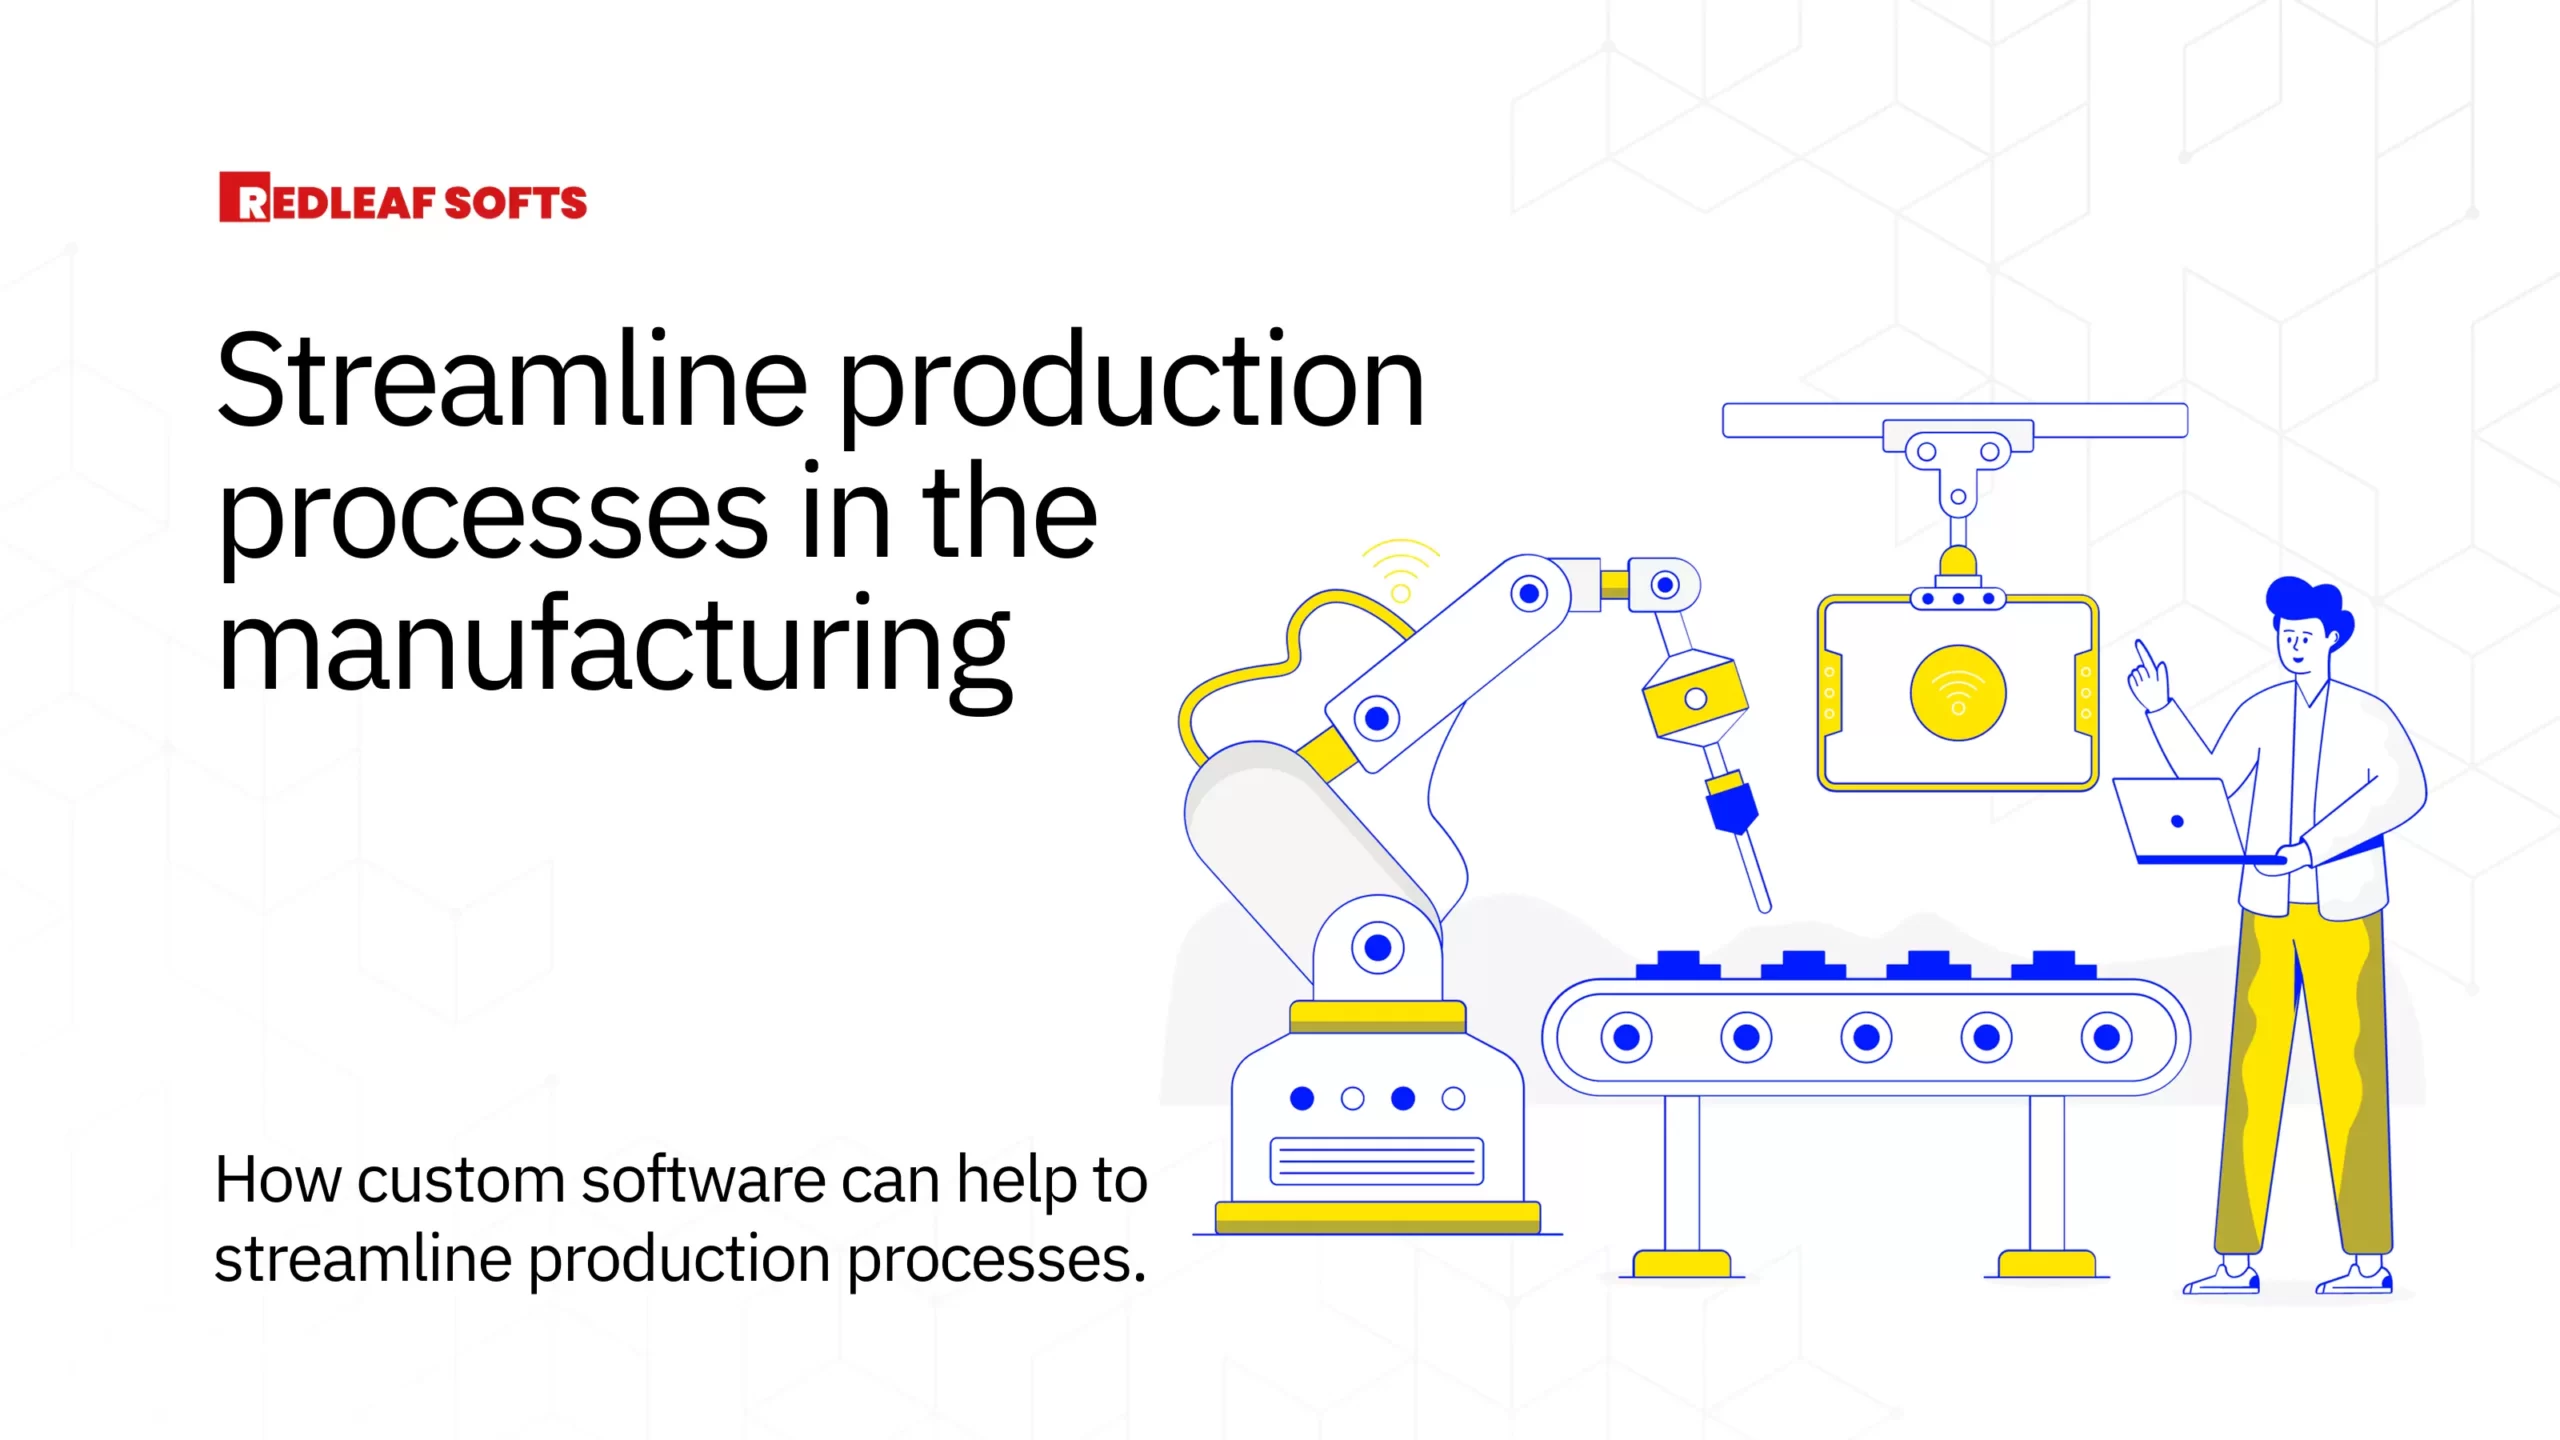 Streamline production processes in the manufacturing